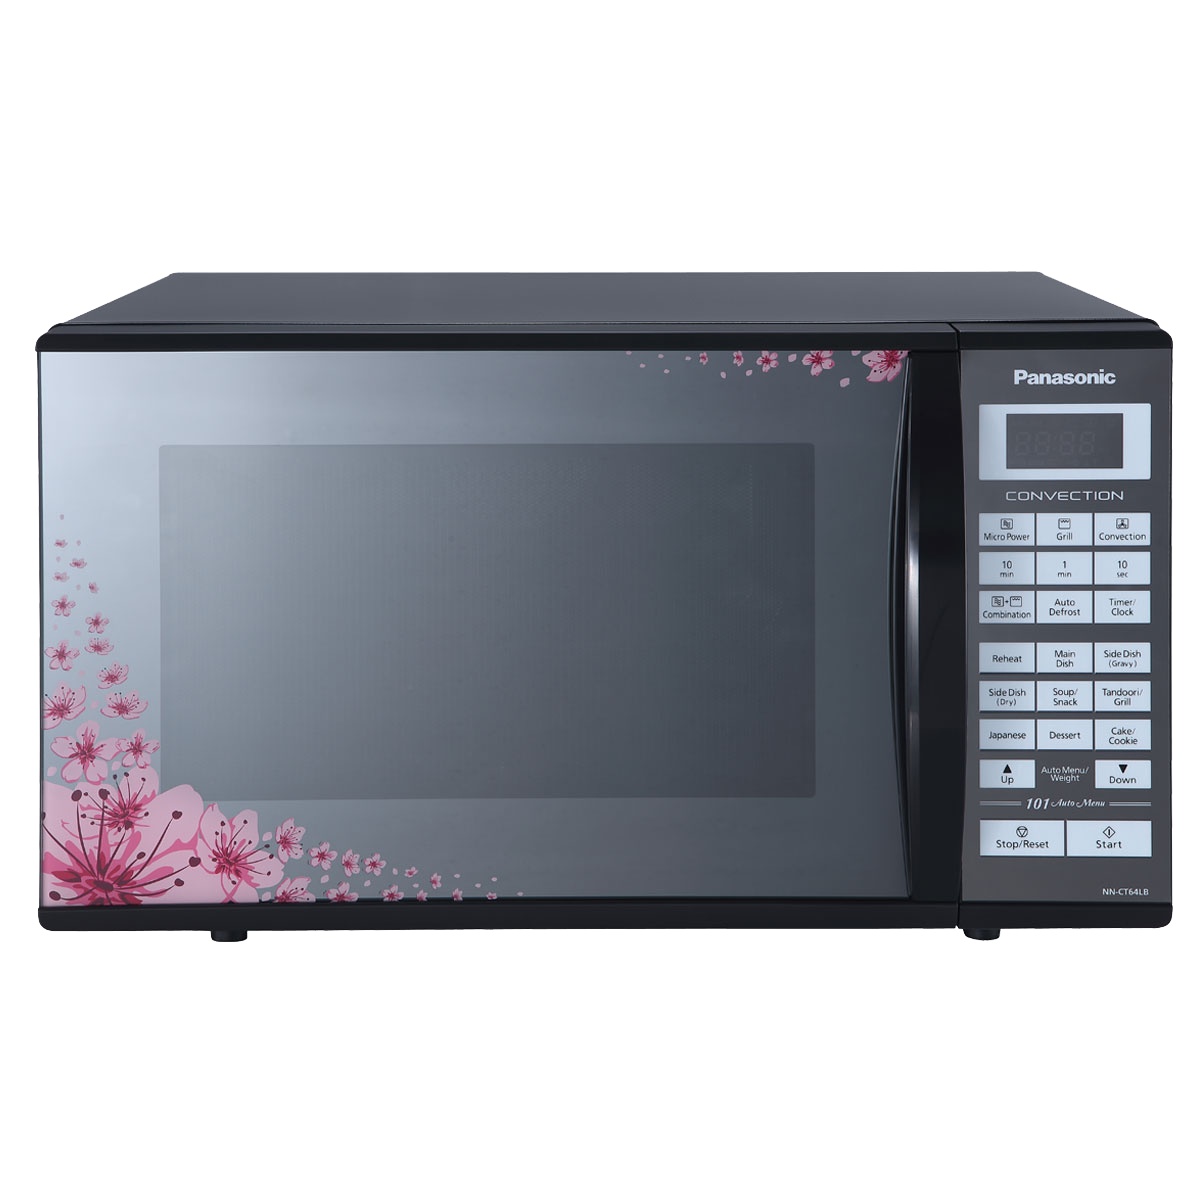 panasonic - panasonic 27 Litres Convection Microwave Oven (Floral Mirror Finish, NN-CT64LBFDG, Floral Mirror Finish)